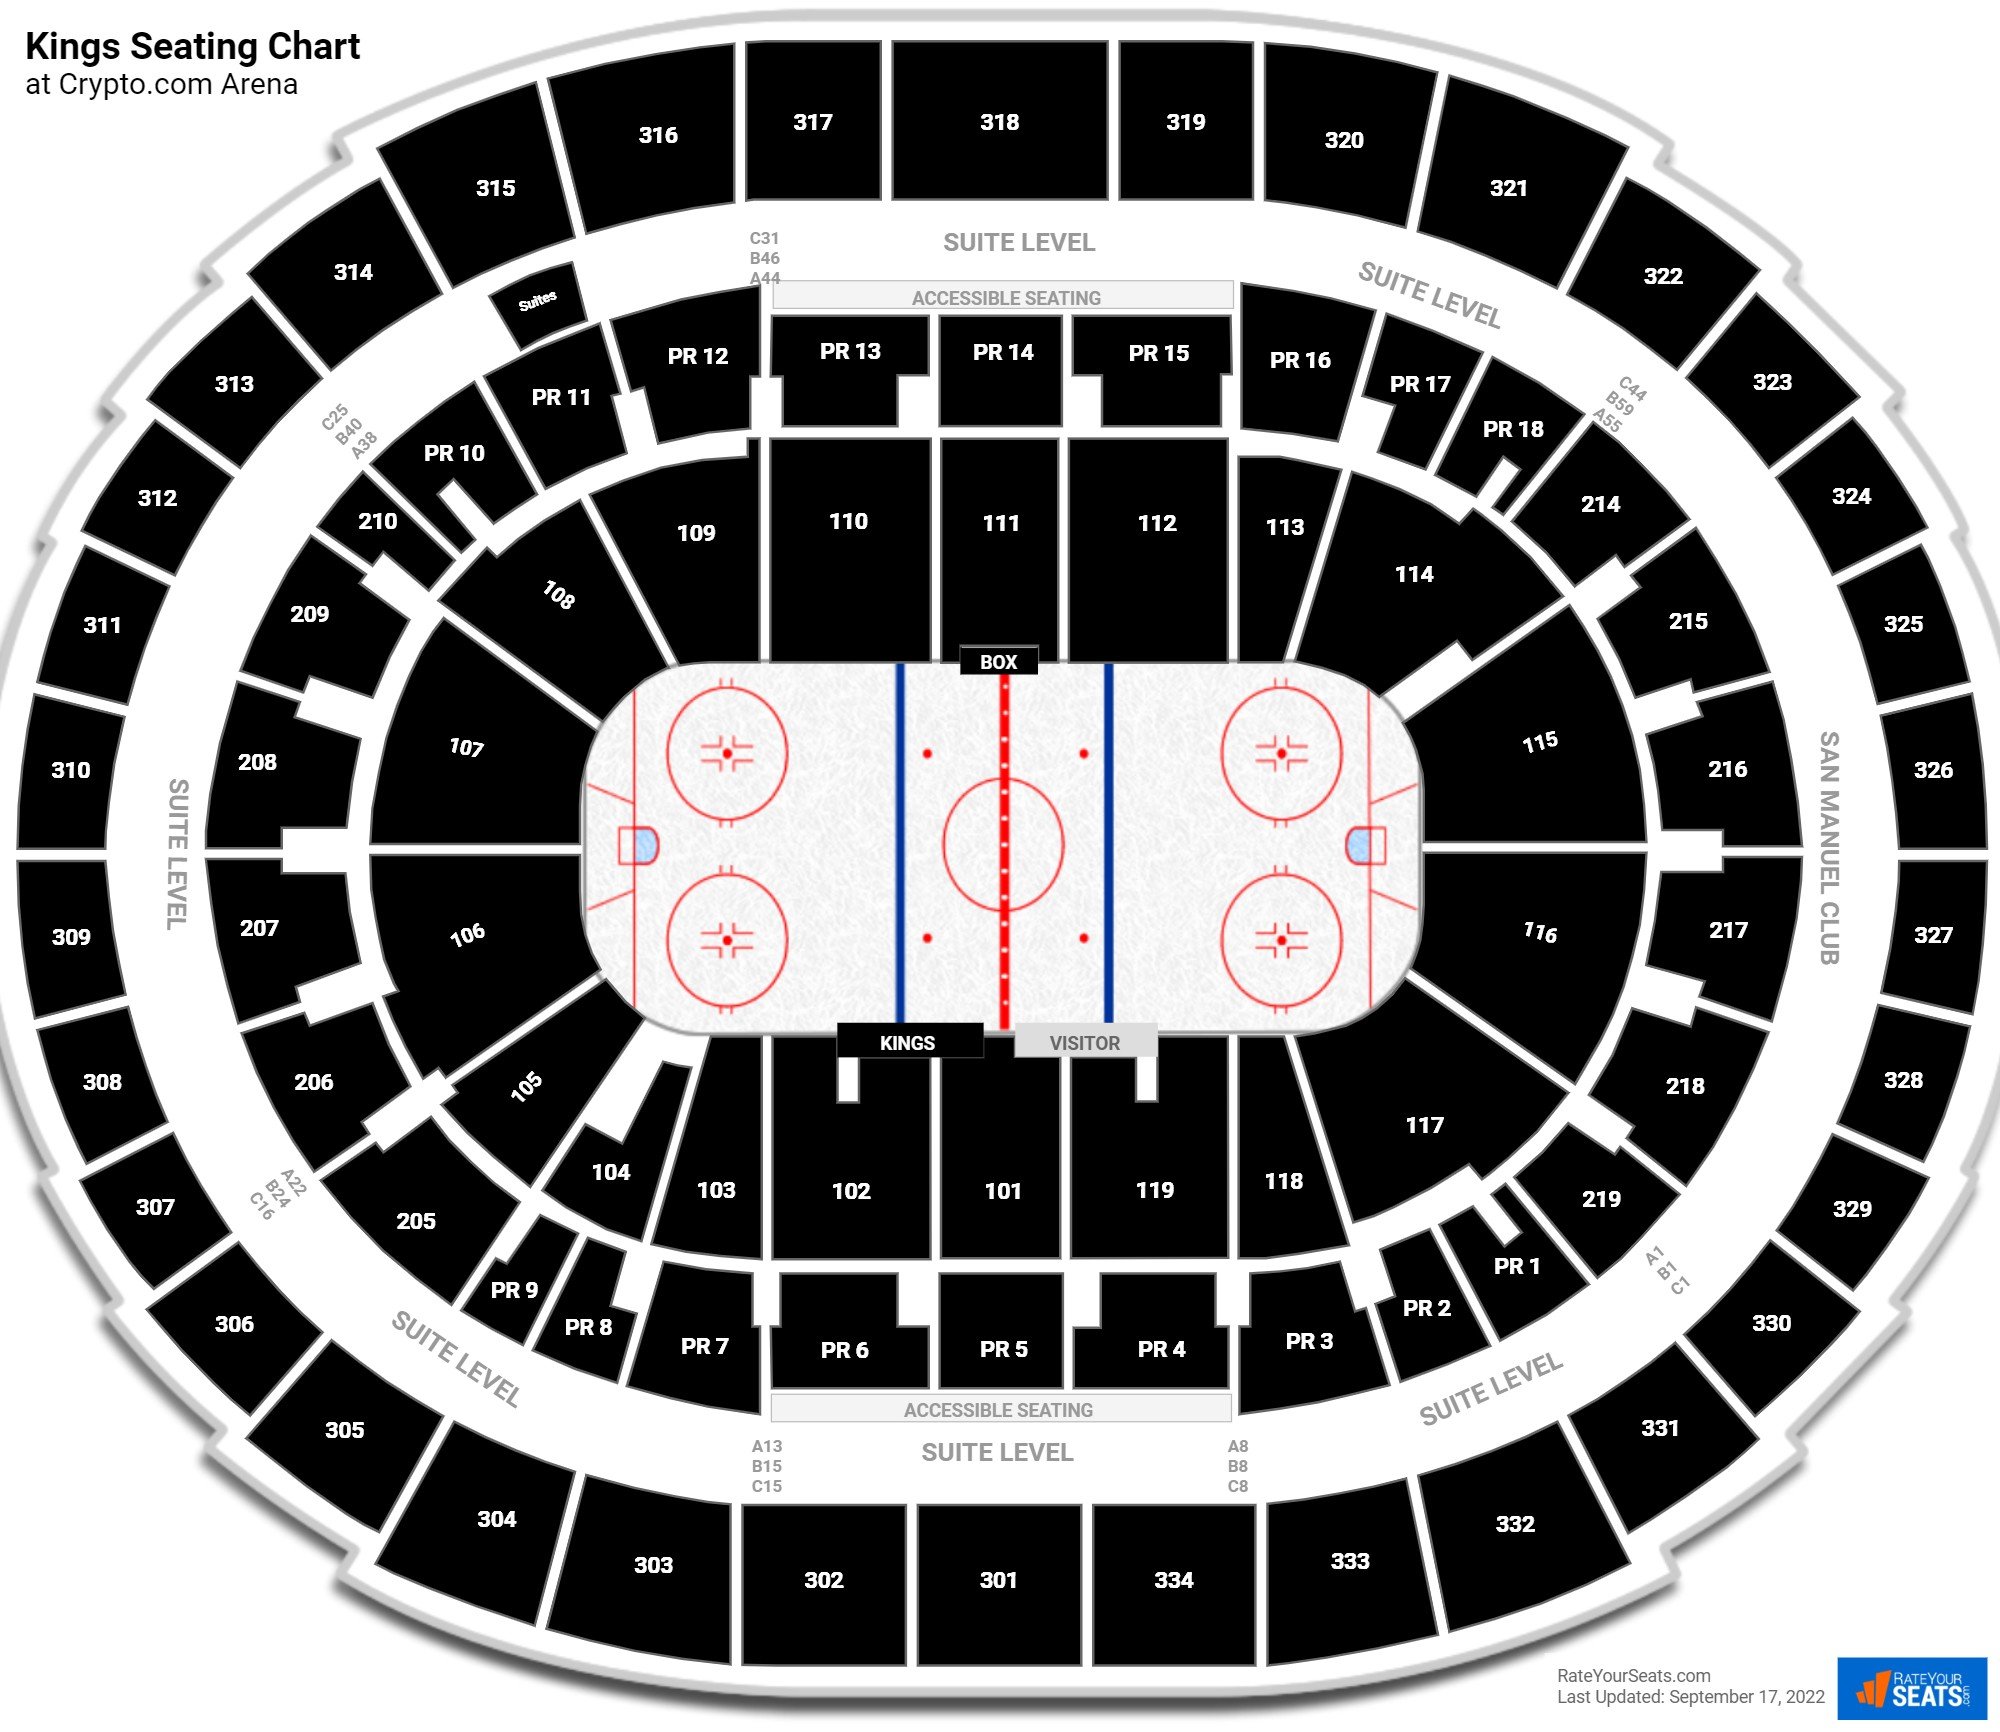 NHL Hockey Arenas - Staples Center - Home of the Los Angeles Kings